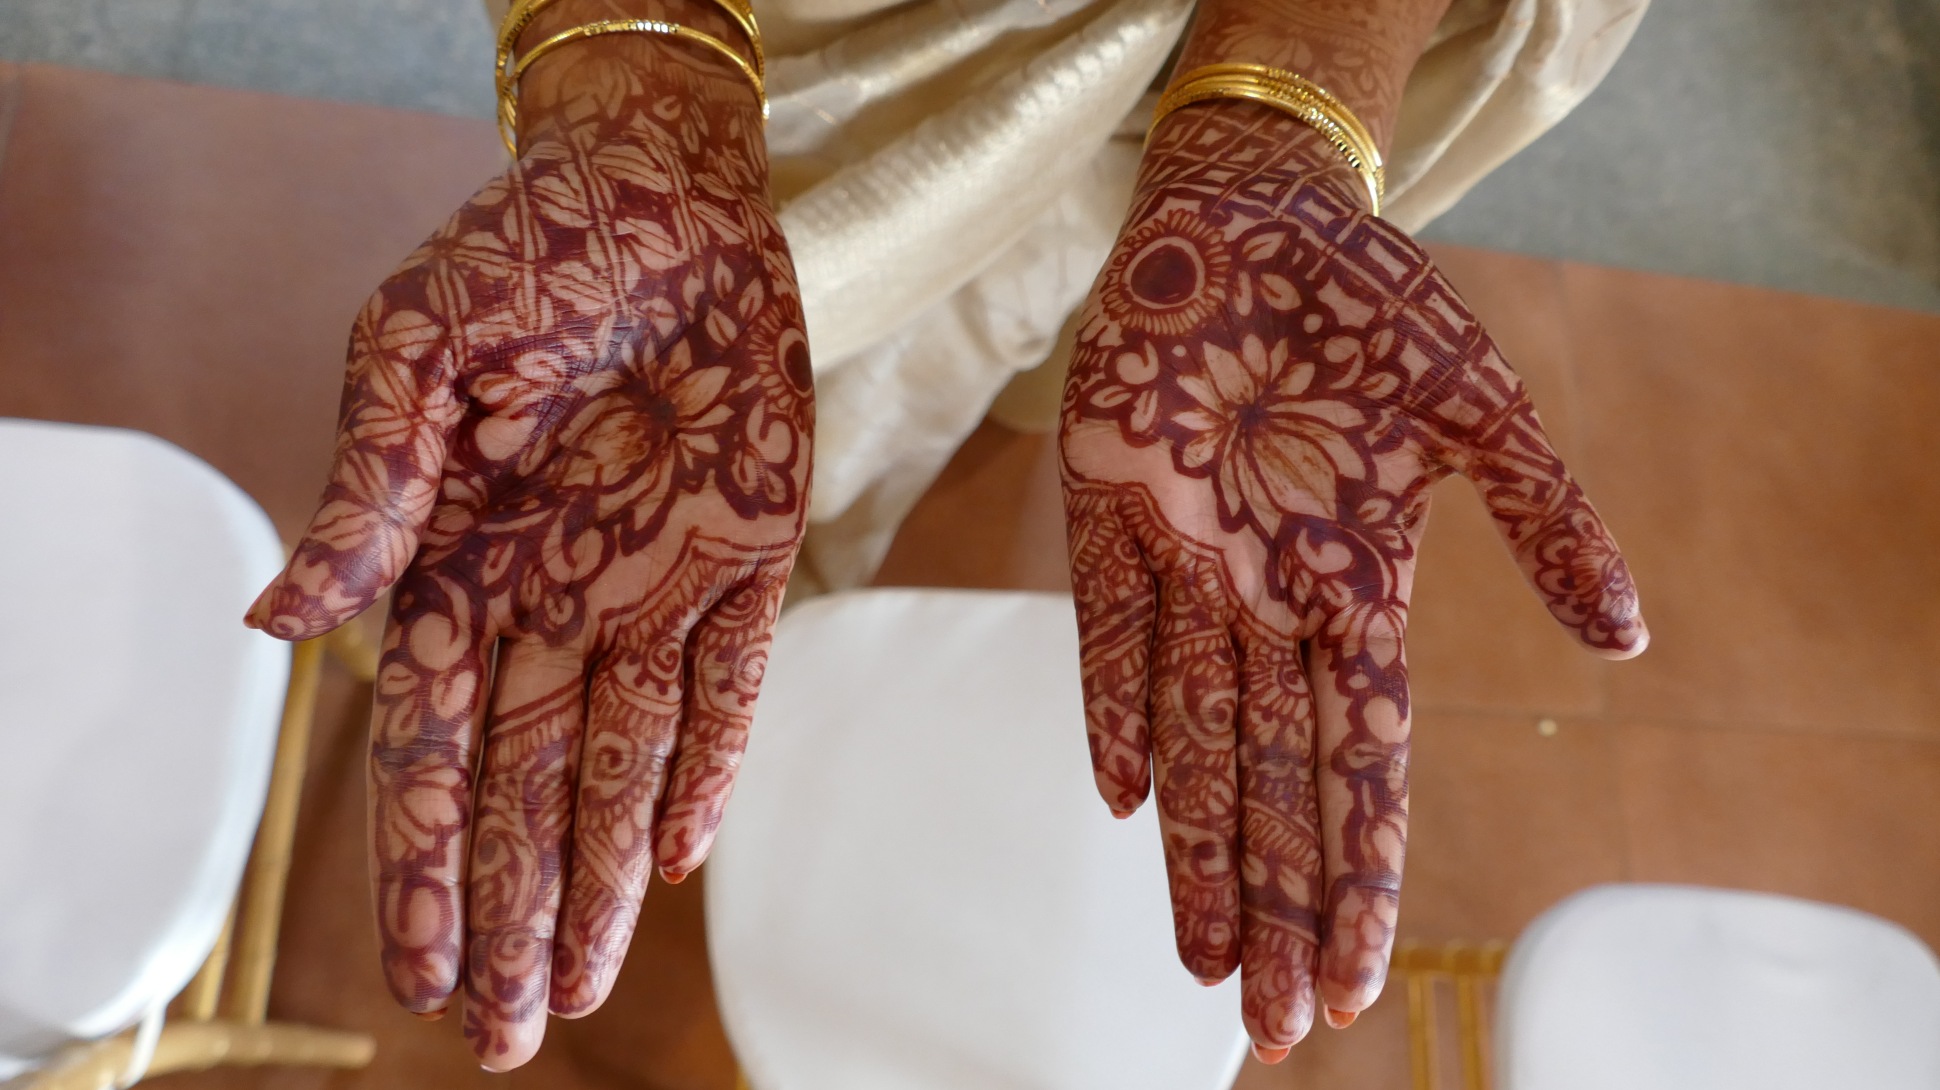 A pair of hands, palms upturned, covered in intricate floral patterns in dark orange 